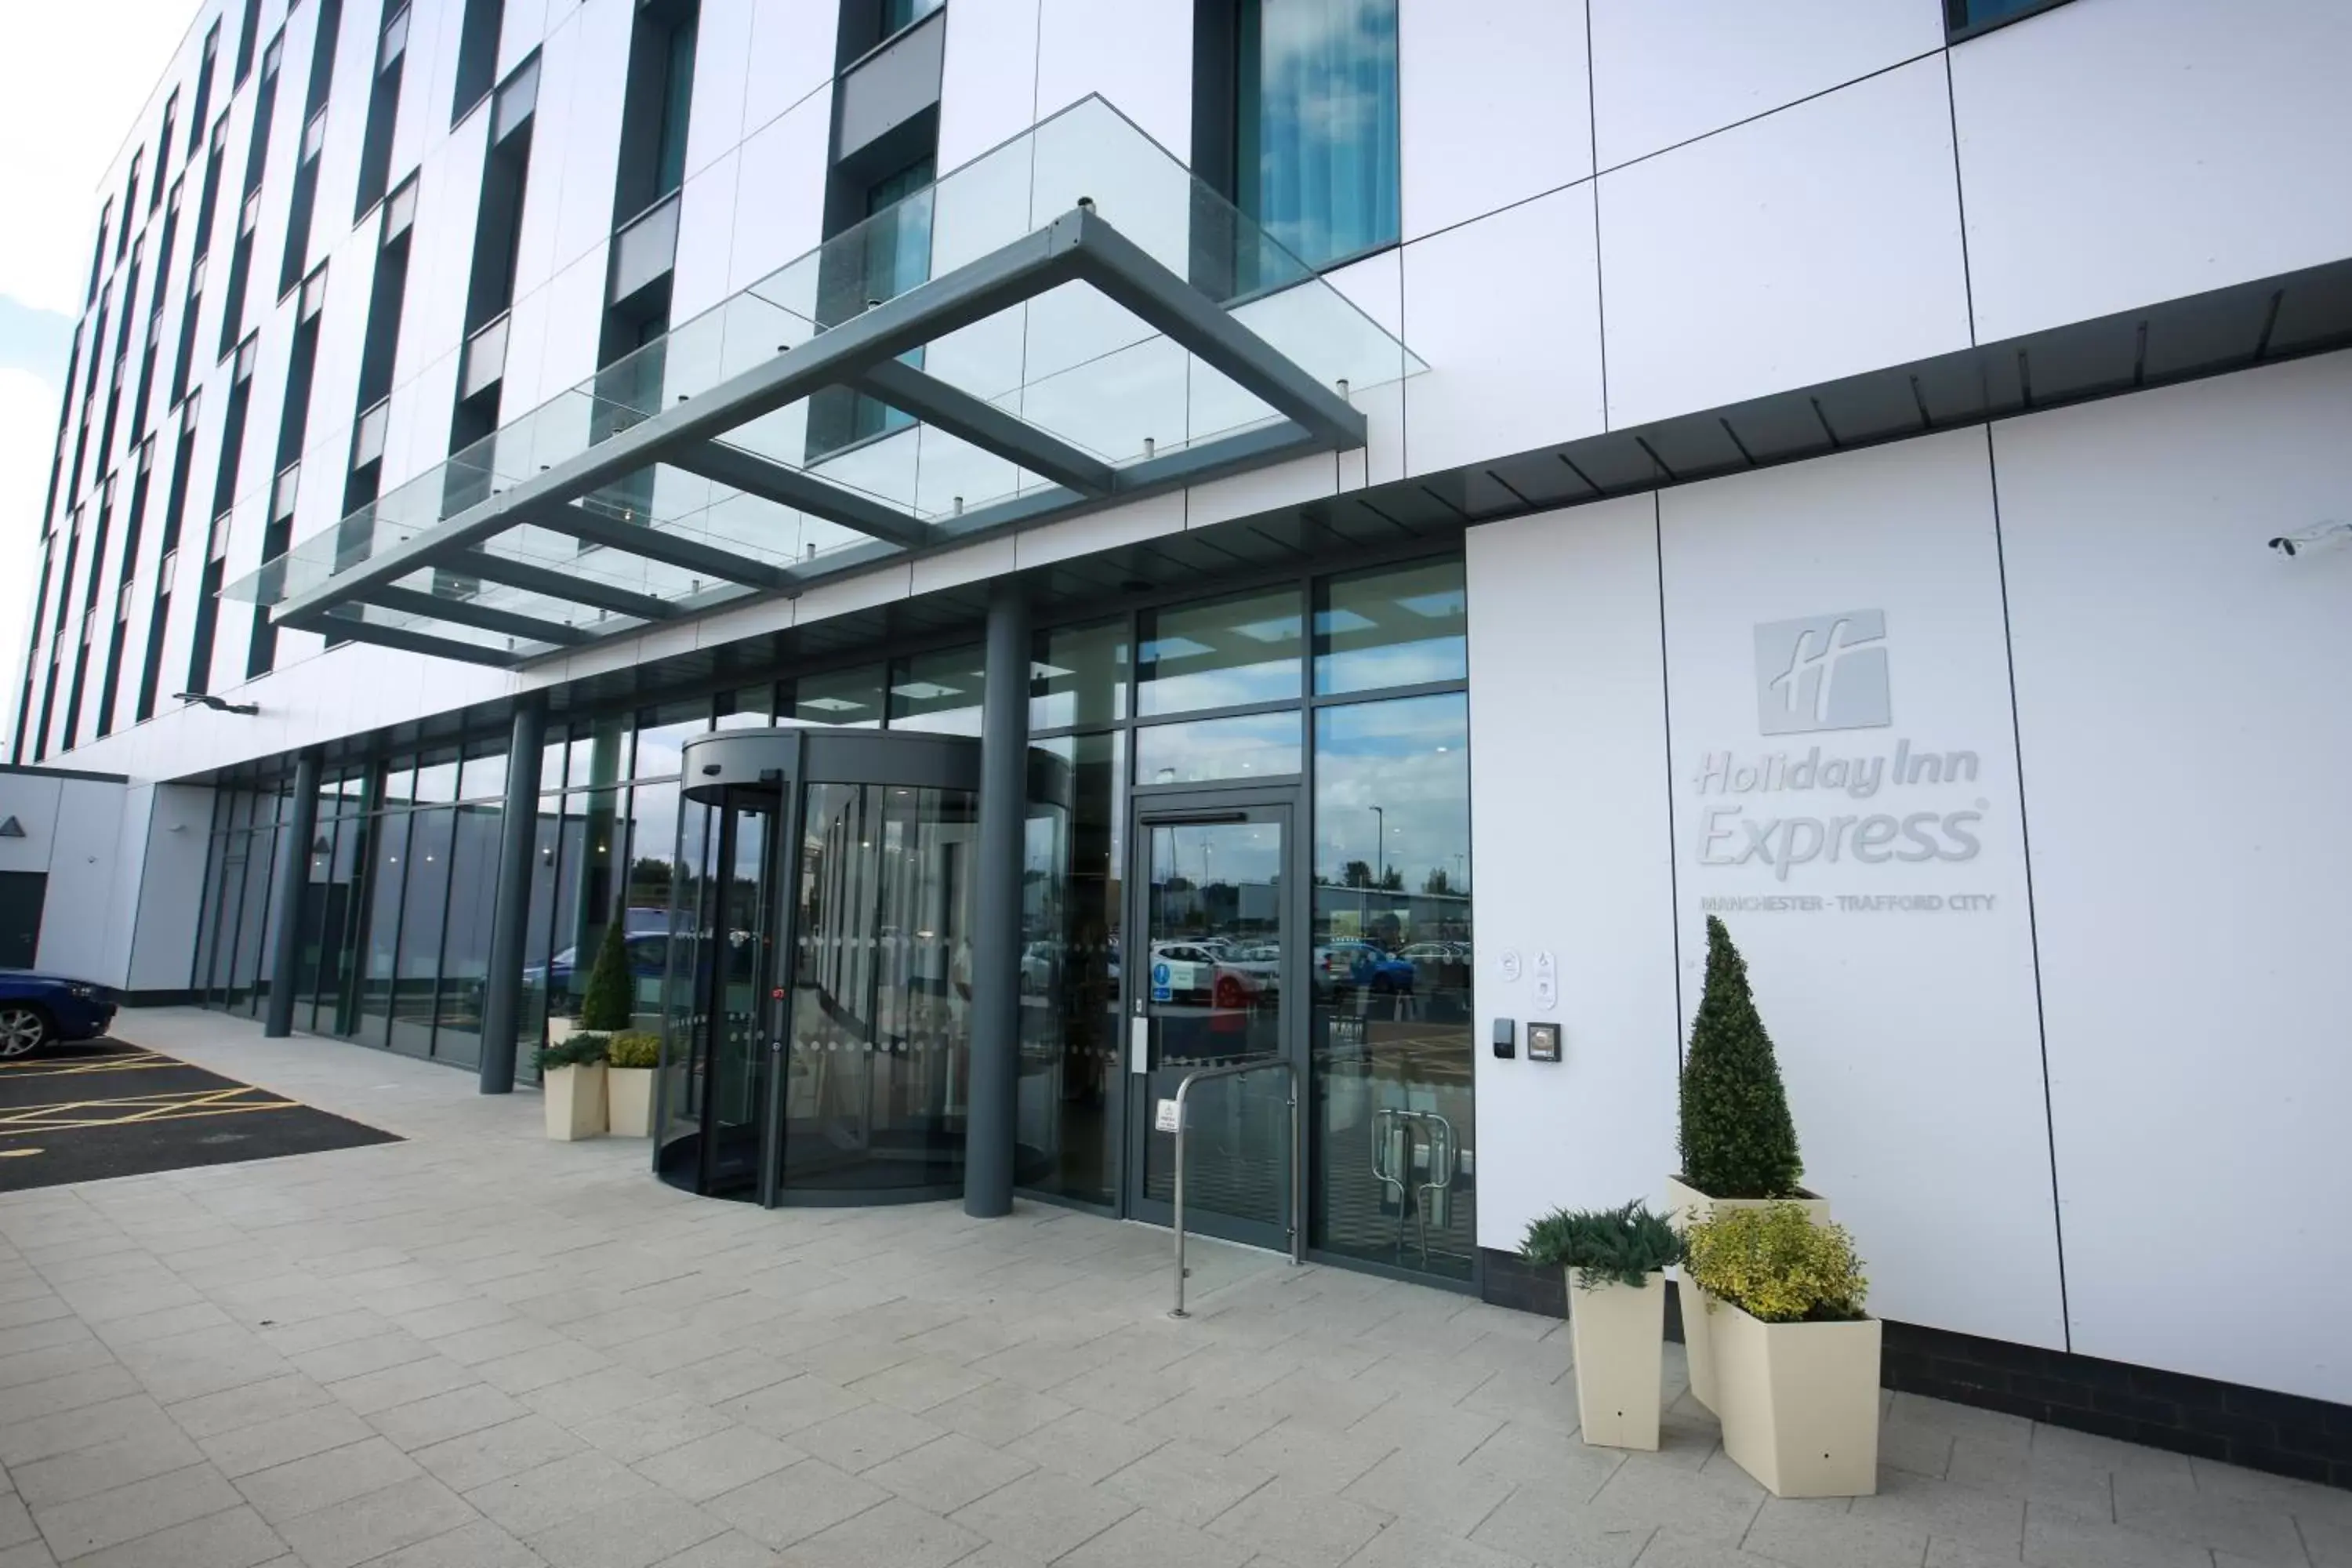 Property building in Holiday Inn Express - Manchester - TRAFFORDCITY, an IHG Hotel